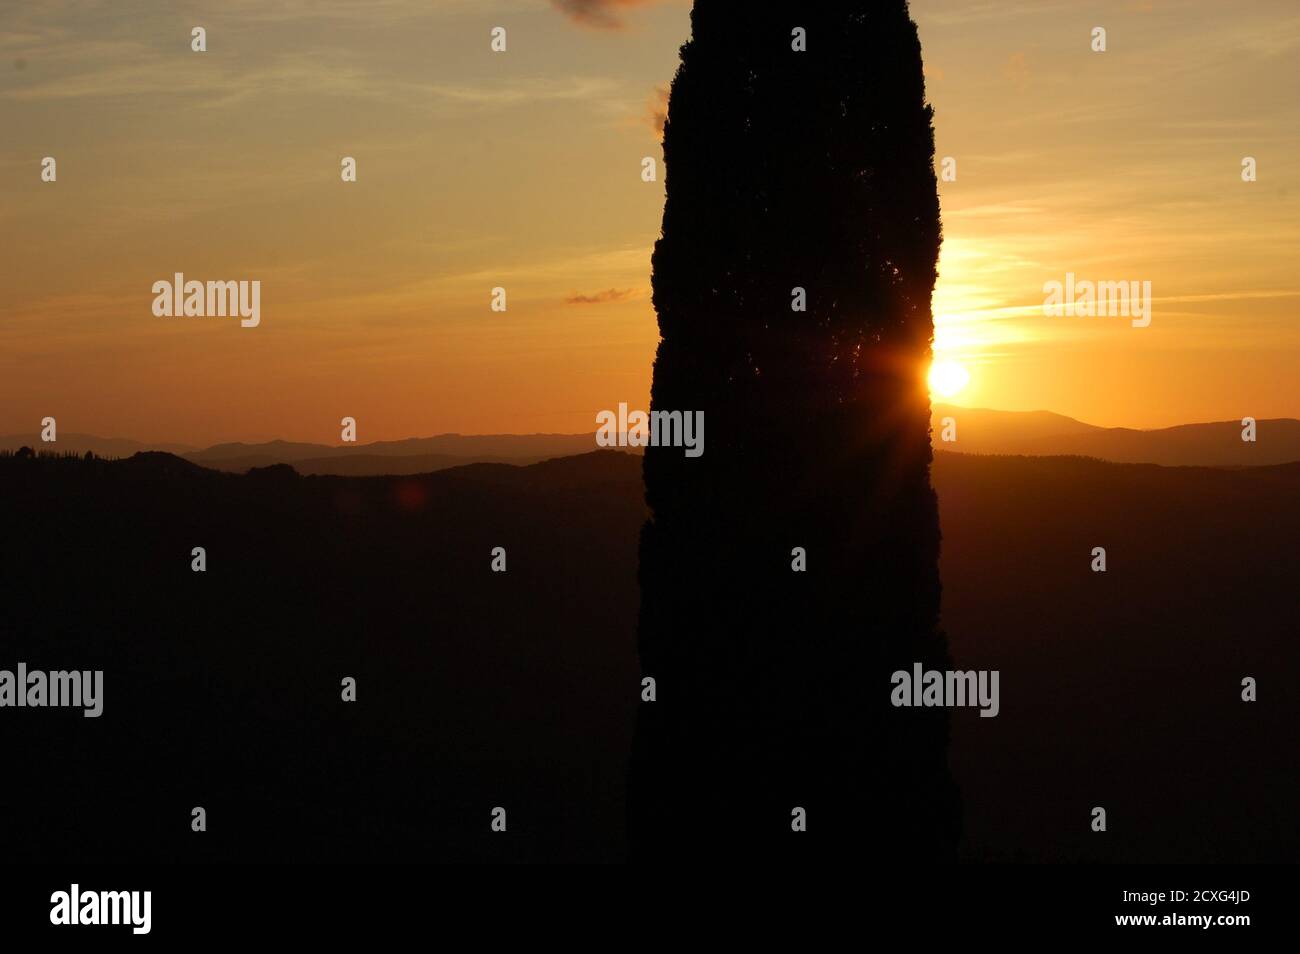 Orange sunset light and silhouette of hills and  part of a big cypress tree in foreground in Montalcino Tuscany Stock Photo